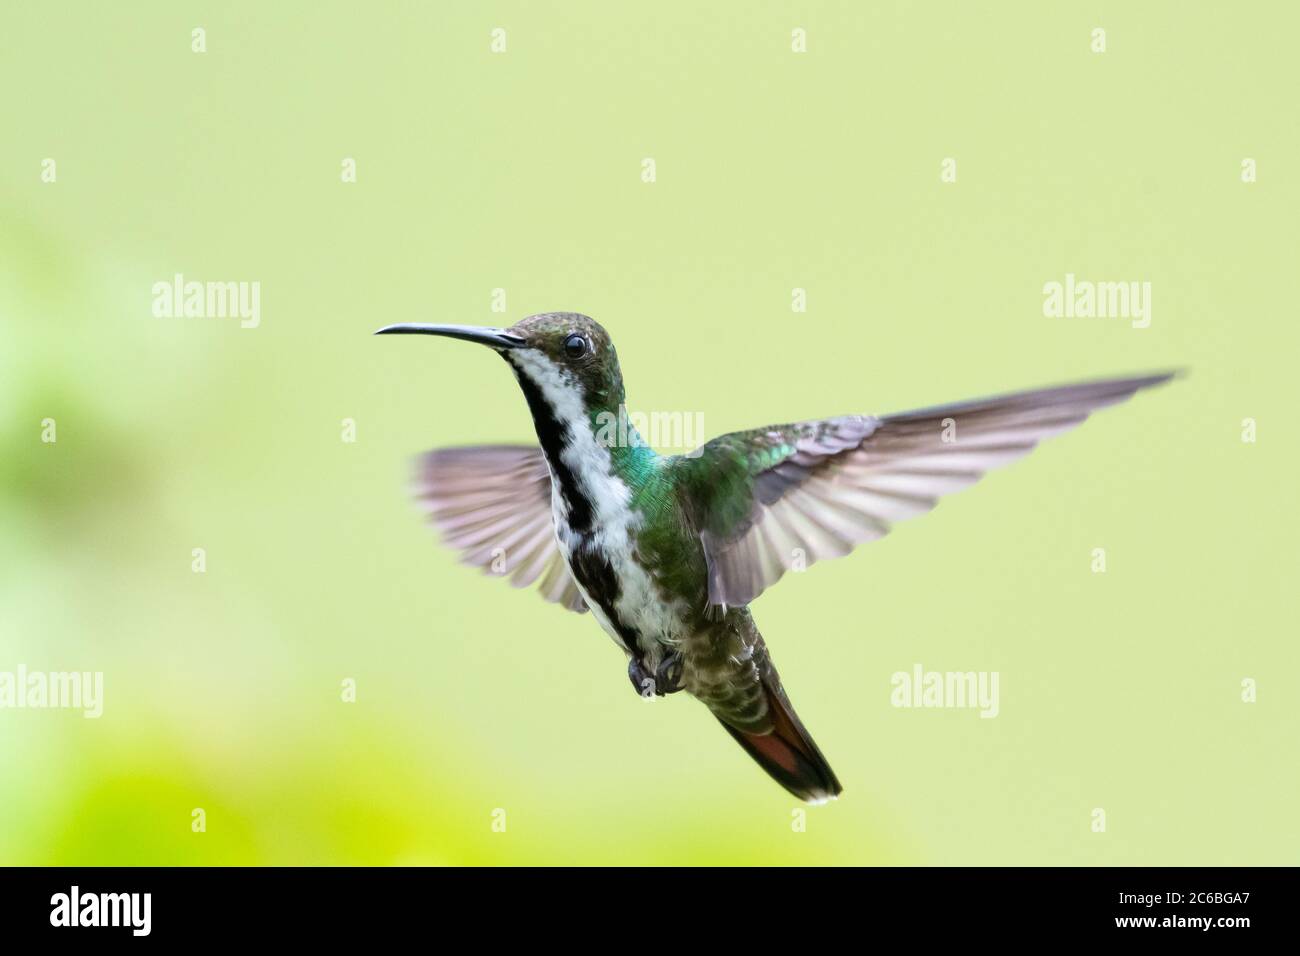 A female Black-throated Mango hummingbird hovering in the air with her wings spread. Stock Photo